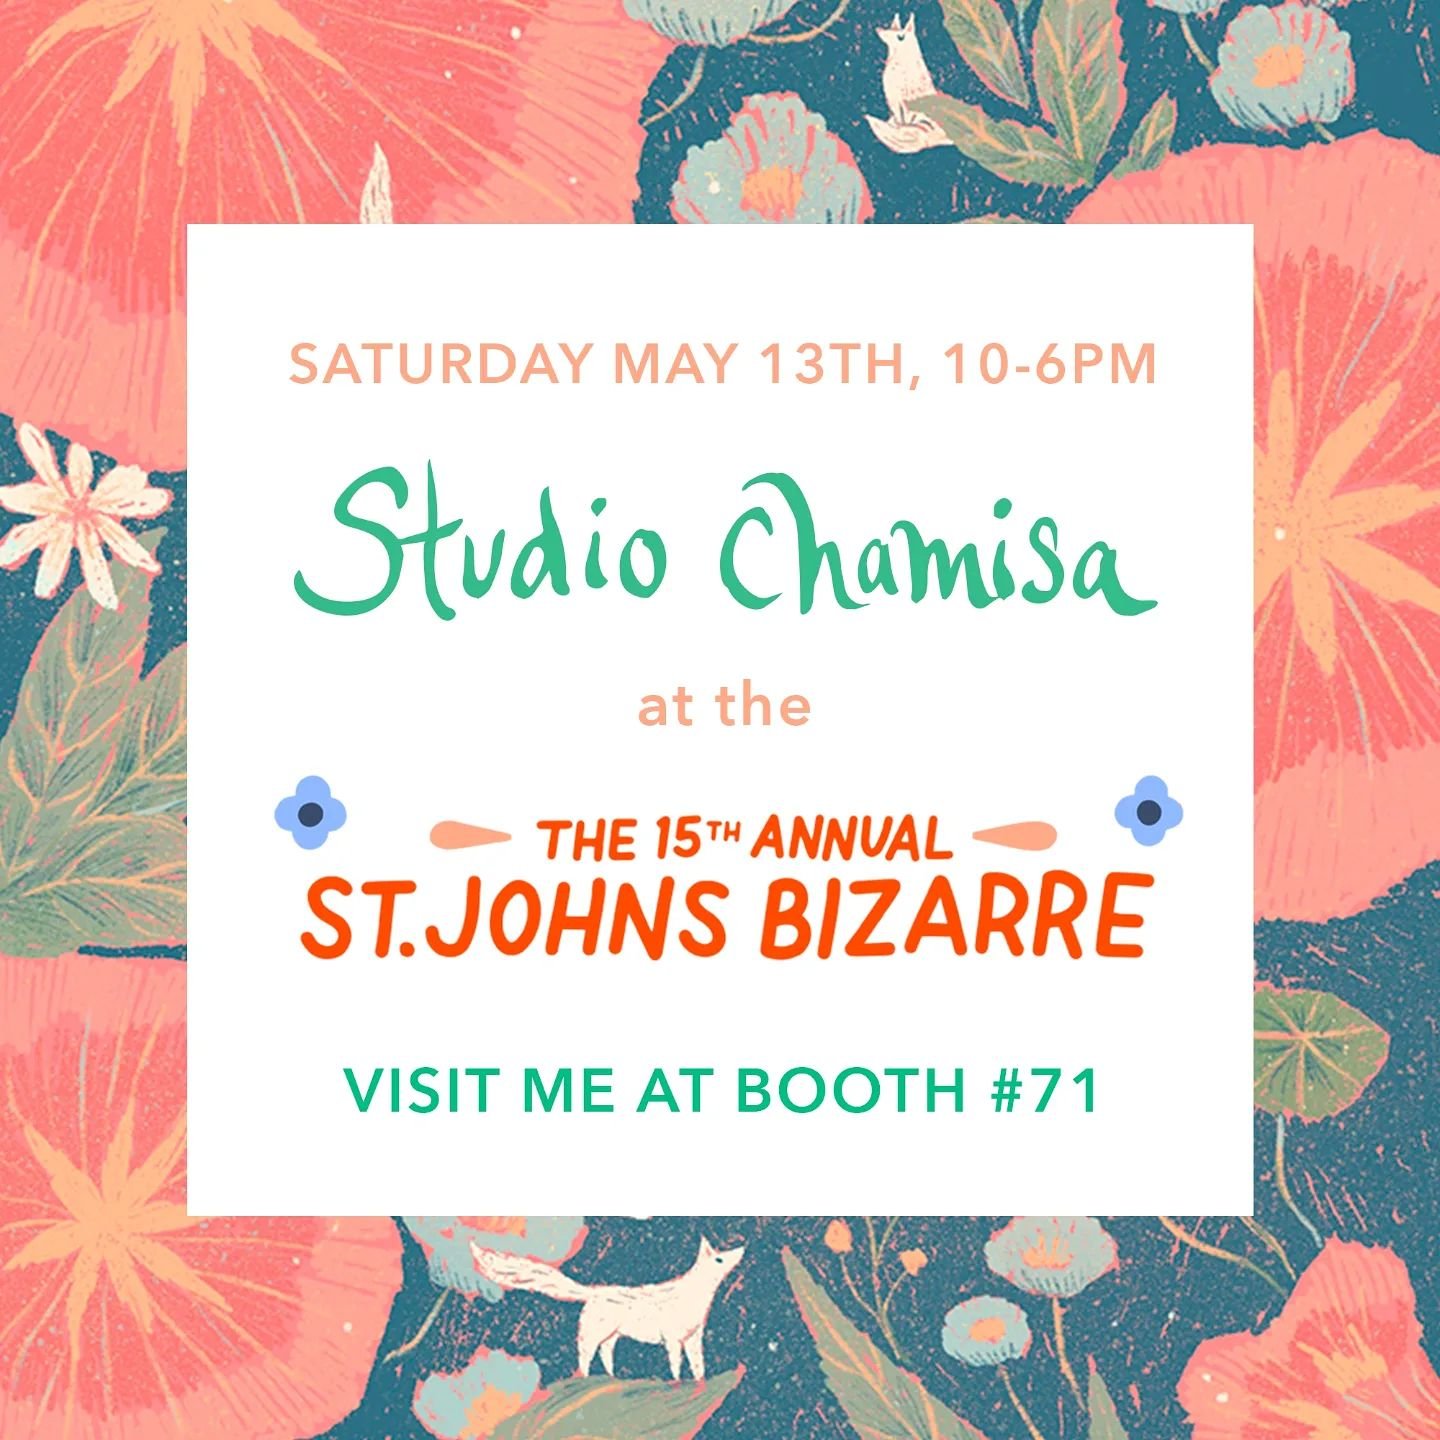 Tomorrow is the St. John's Bizarre!! It's going to be glorious weather here in Portland, so if you're around come out and visit me at booth 71. I've got Mother's Day cards, signed books, lots of new prints, stickers, tea towels and the last few baby 